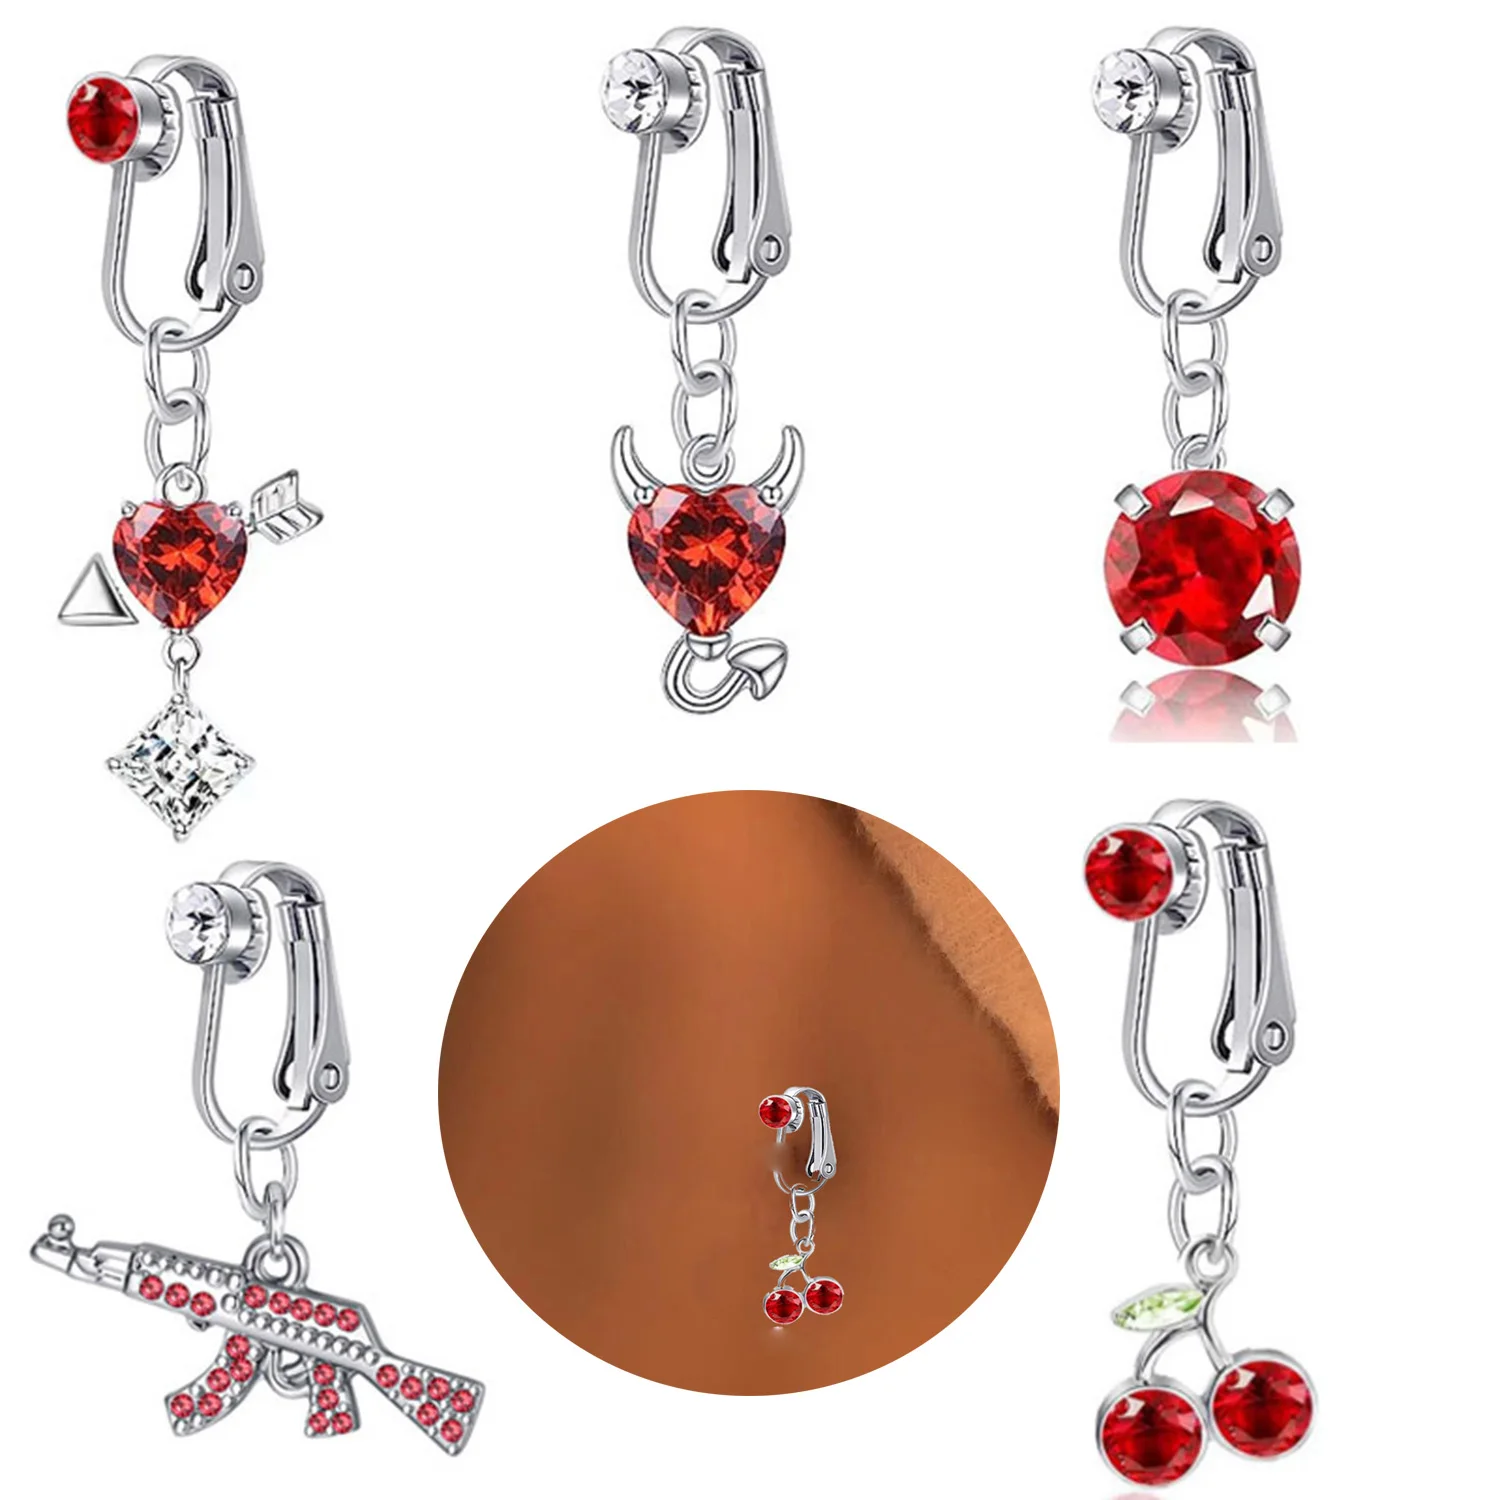 

New Fake Belly Ring Fake Piercing Heart Clip On Umbilical Non Navel Fake Pircing Red Crystal Cartilage Earring Clip Body Jewelry